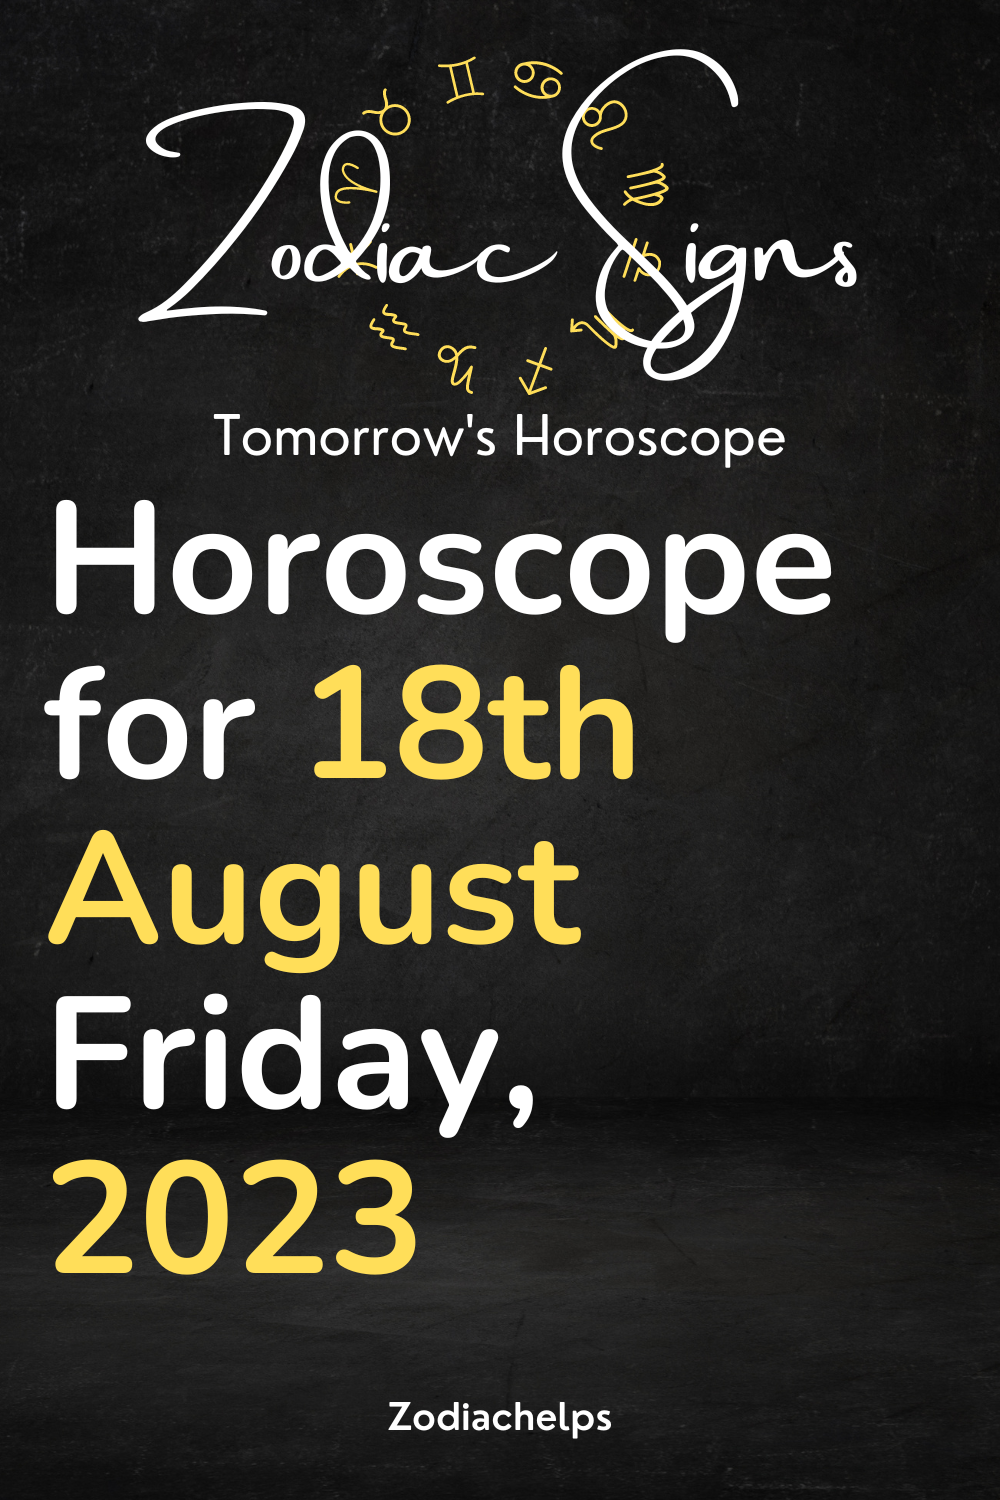 Horoscope for 18th August Friday, 2023